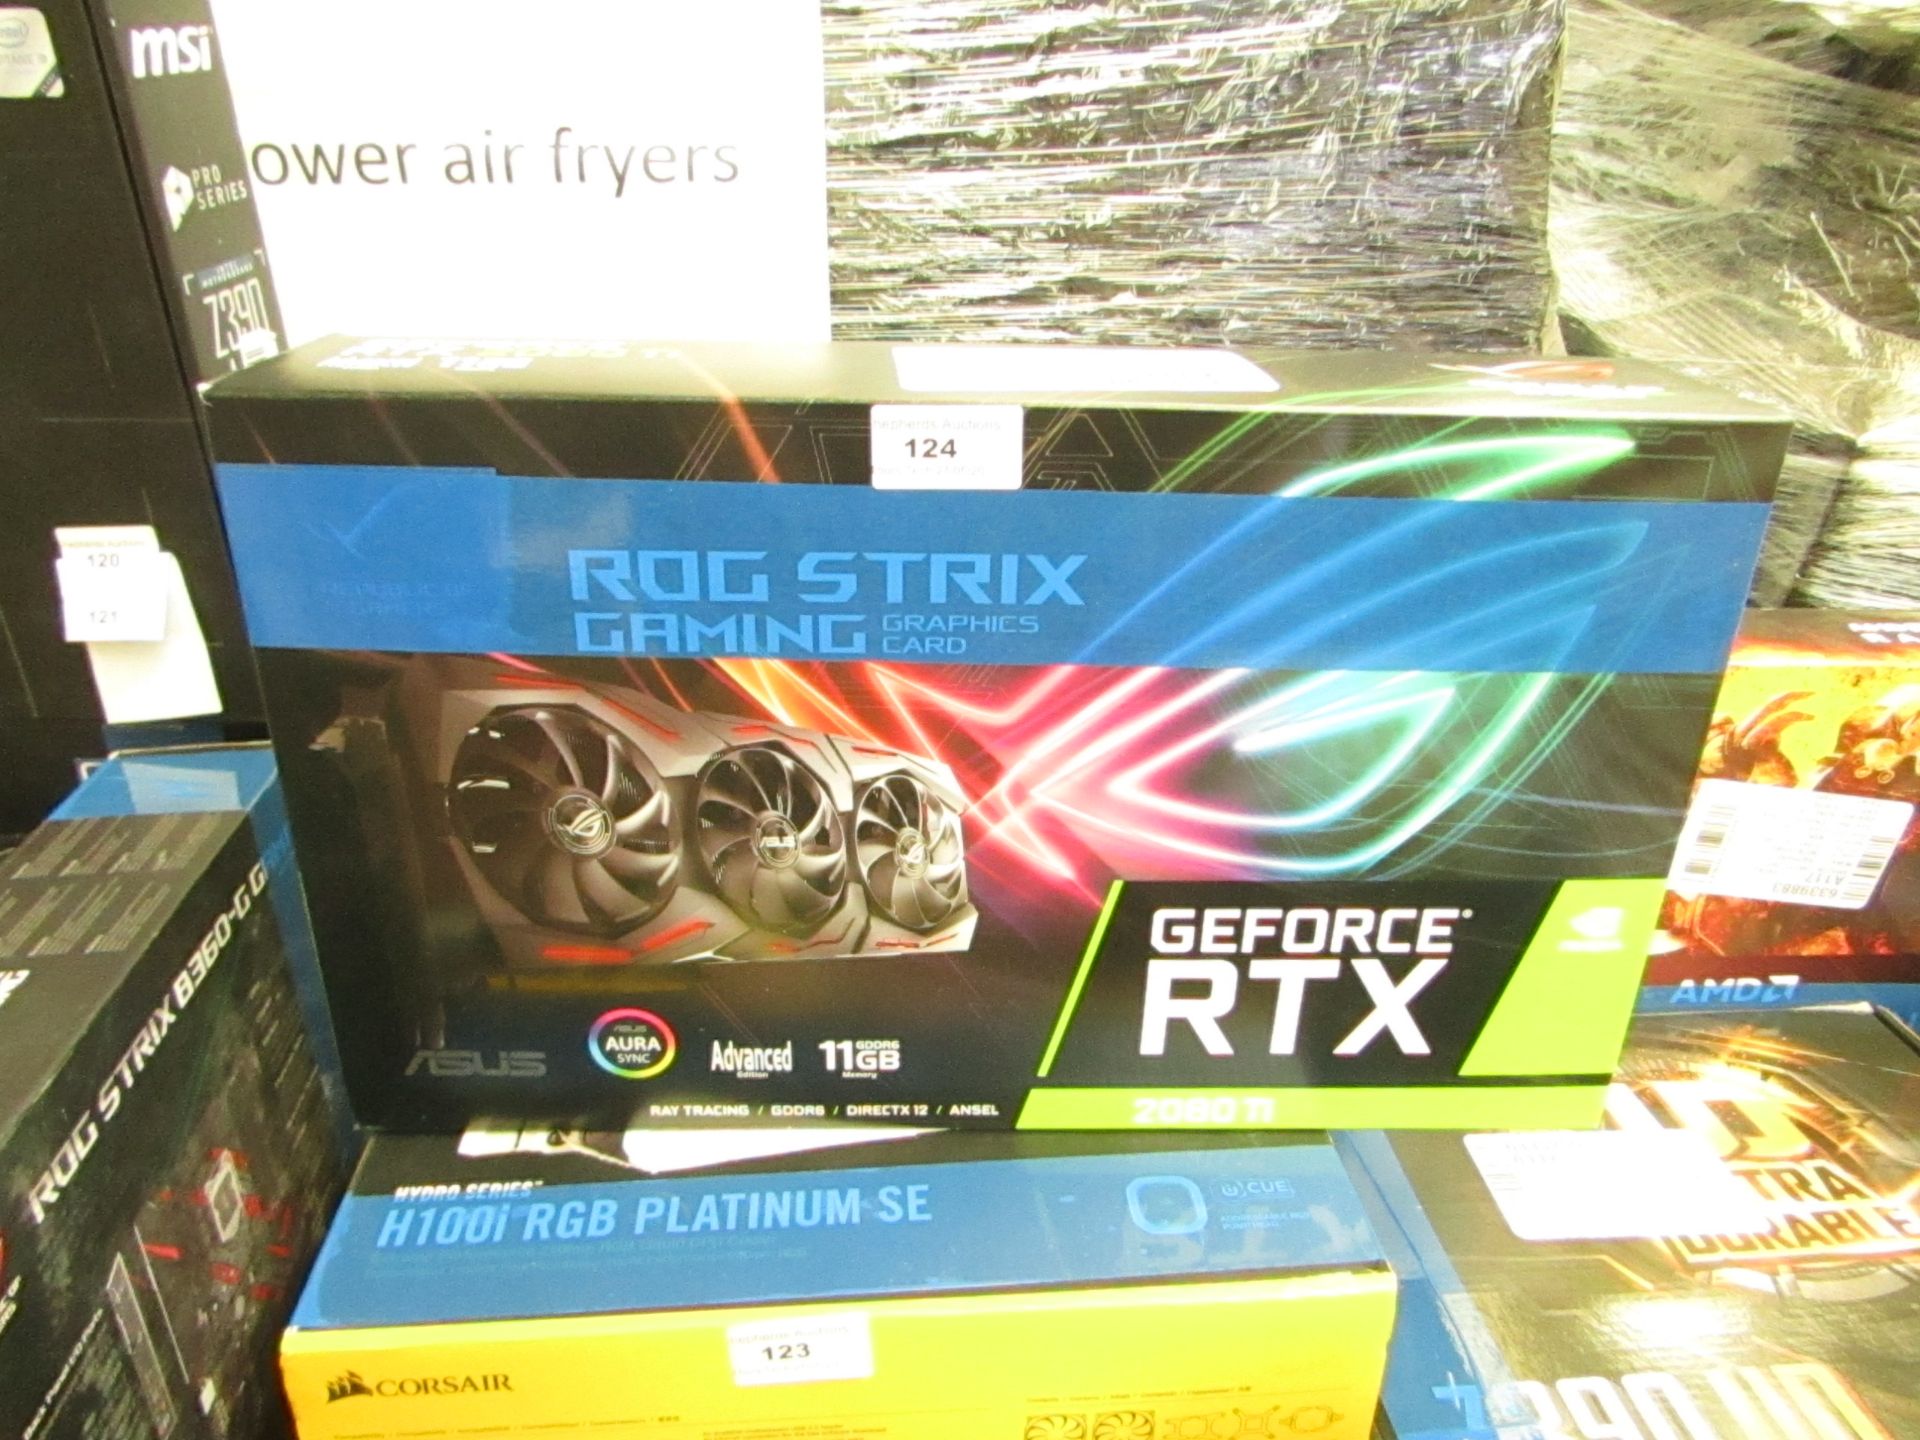 Republic of Gamers Geforce RTX 2080 Ti Advanced Edition. Boxed But Untested. RRP £1499.99